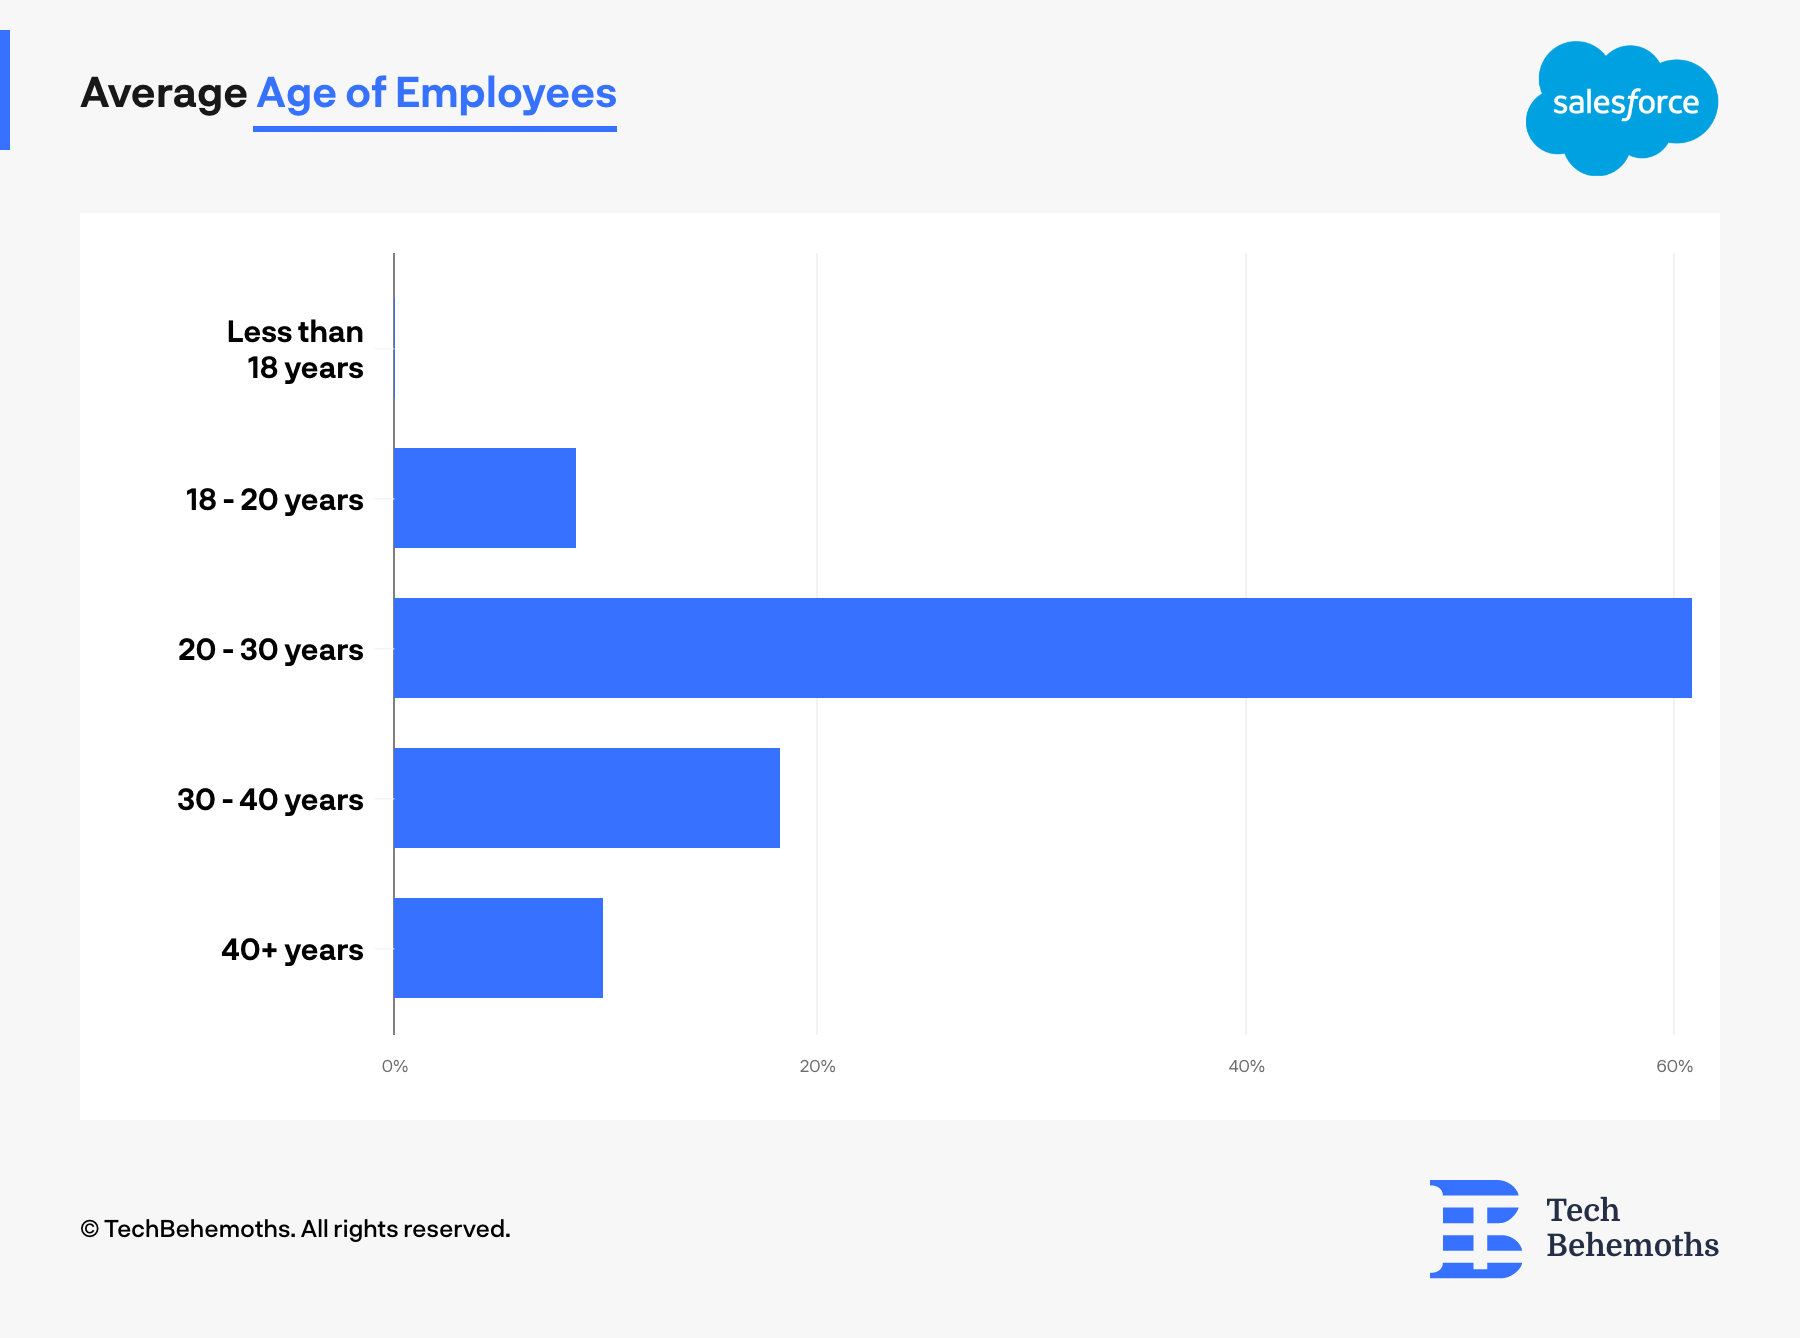 Average Age of Employees at Salesforce